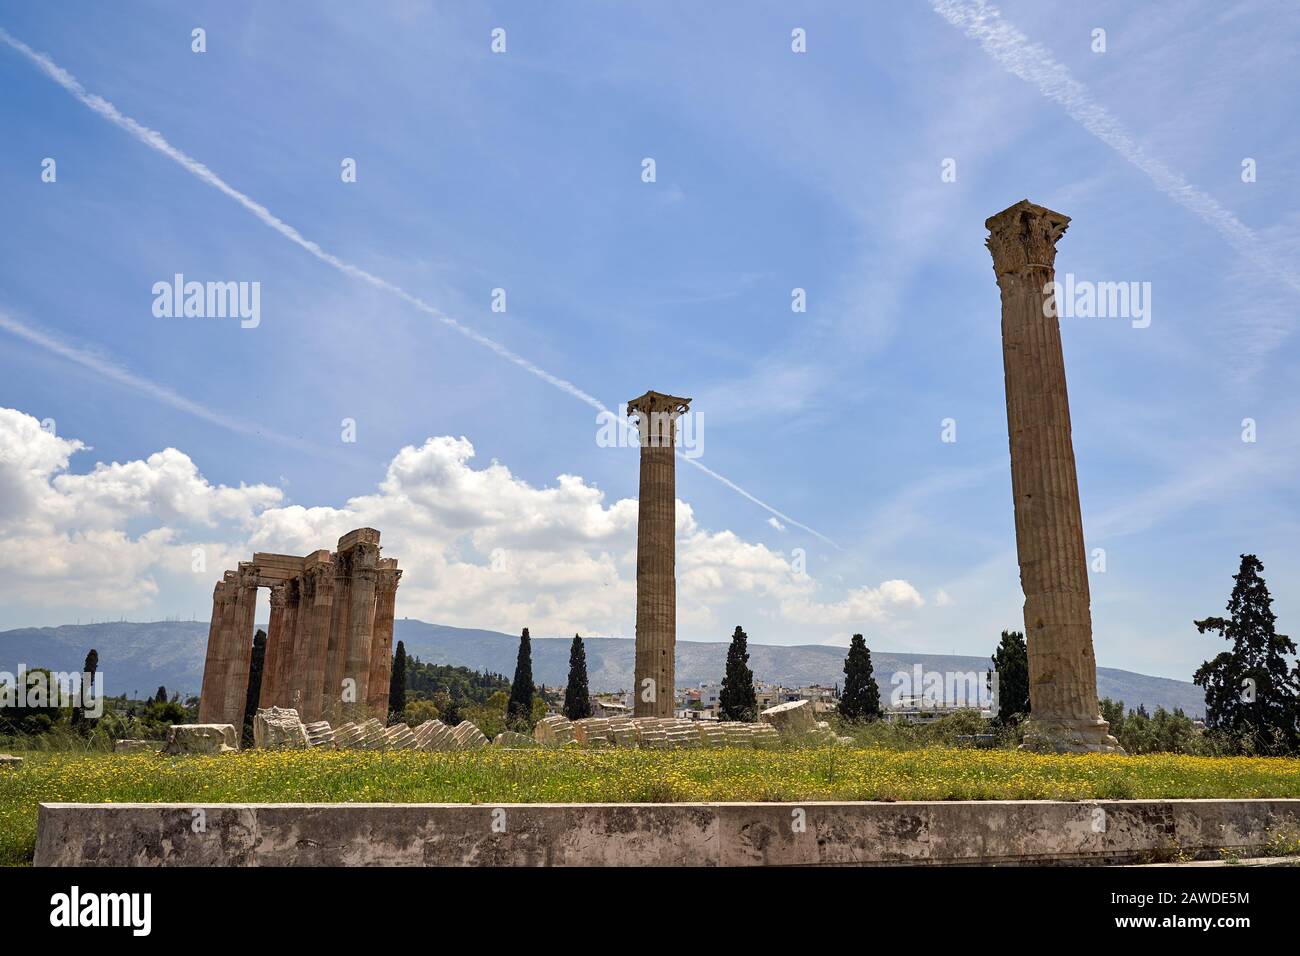 The Temple of Olympian Zeus or the Olympieion or Columns of the Olympian Zeus is a monument of Greece and a former colossal temple at the centre of th Stock Photo